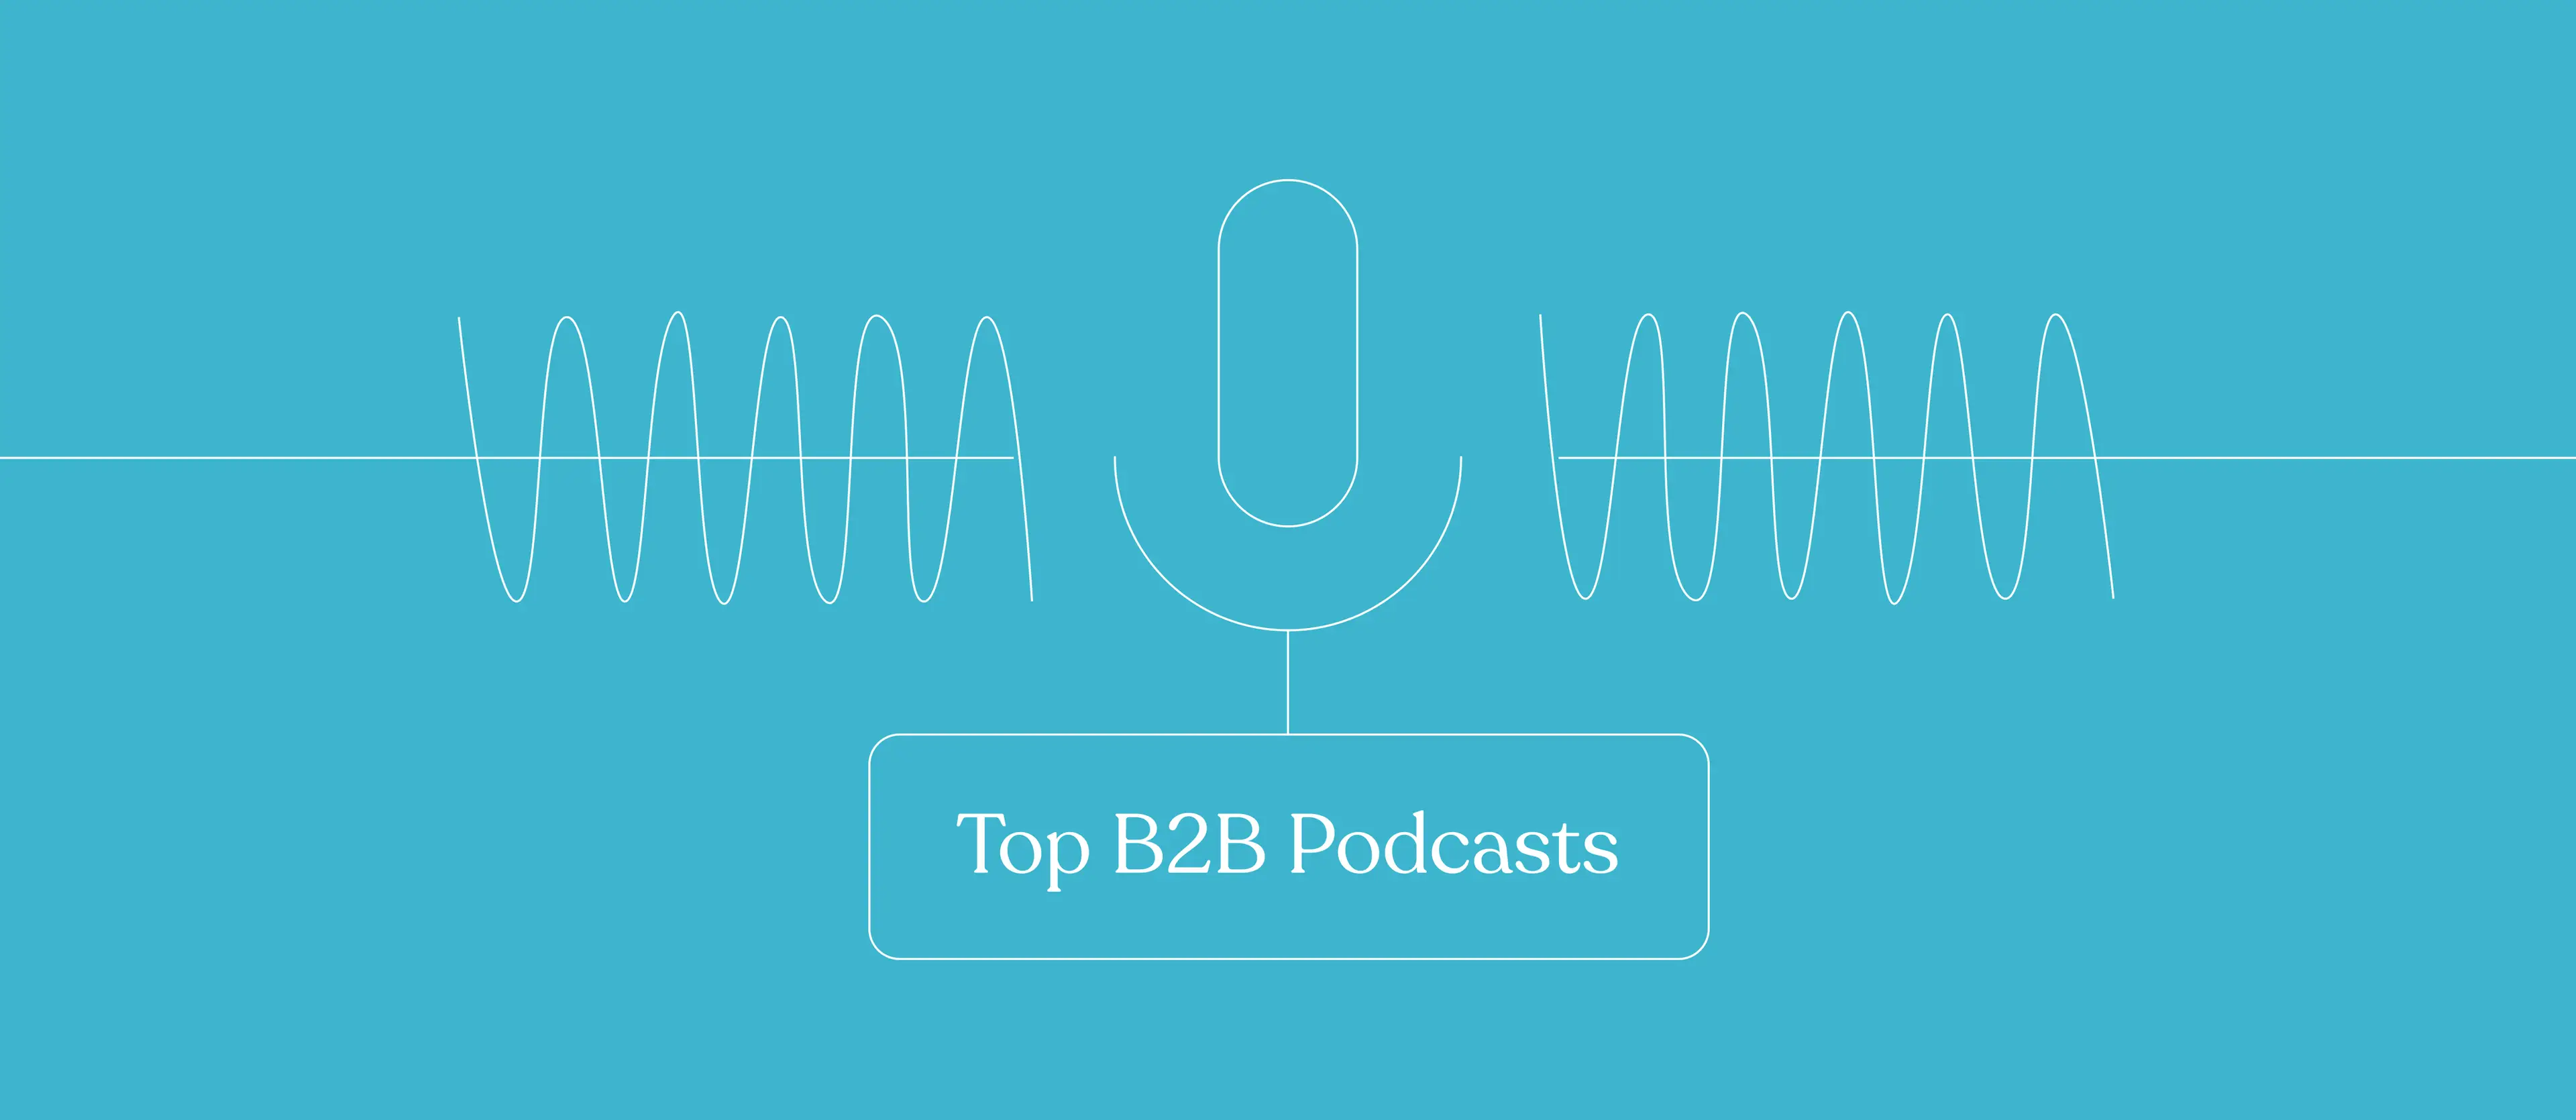 Blue graphic with words Top B2B Podcasts 